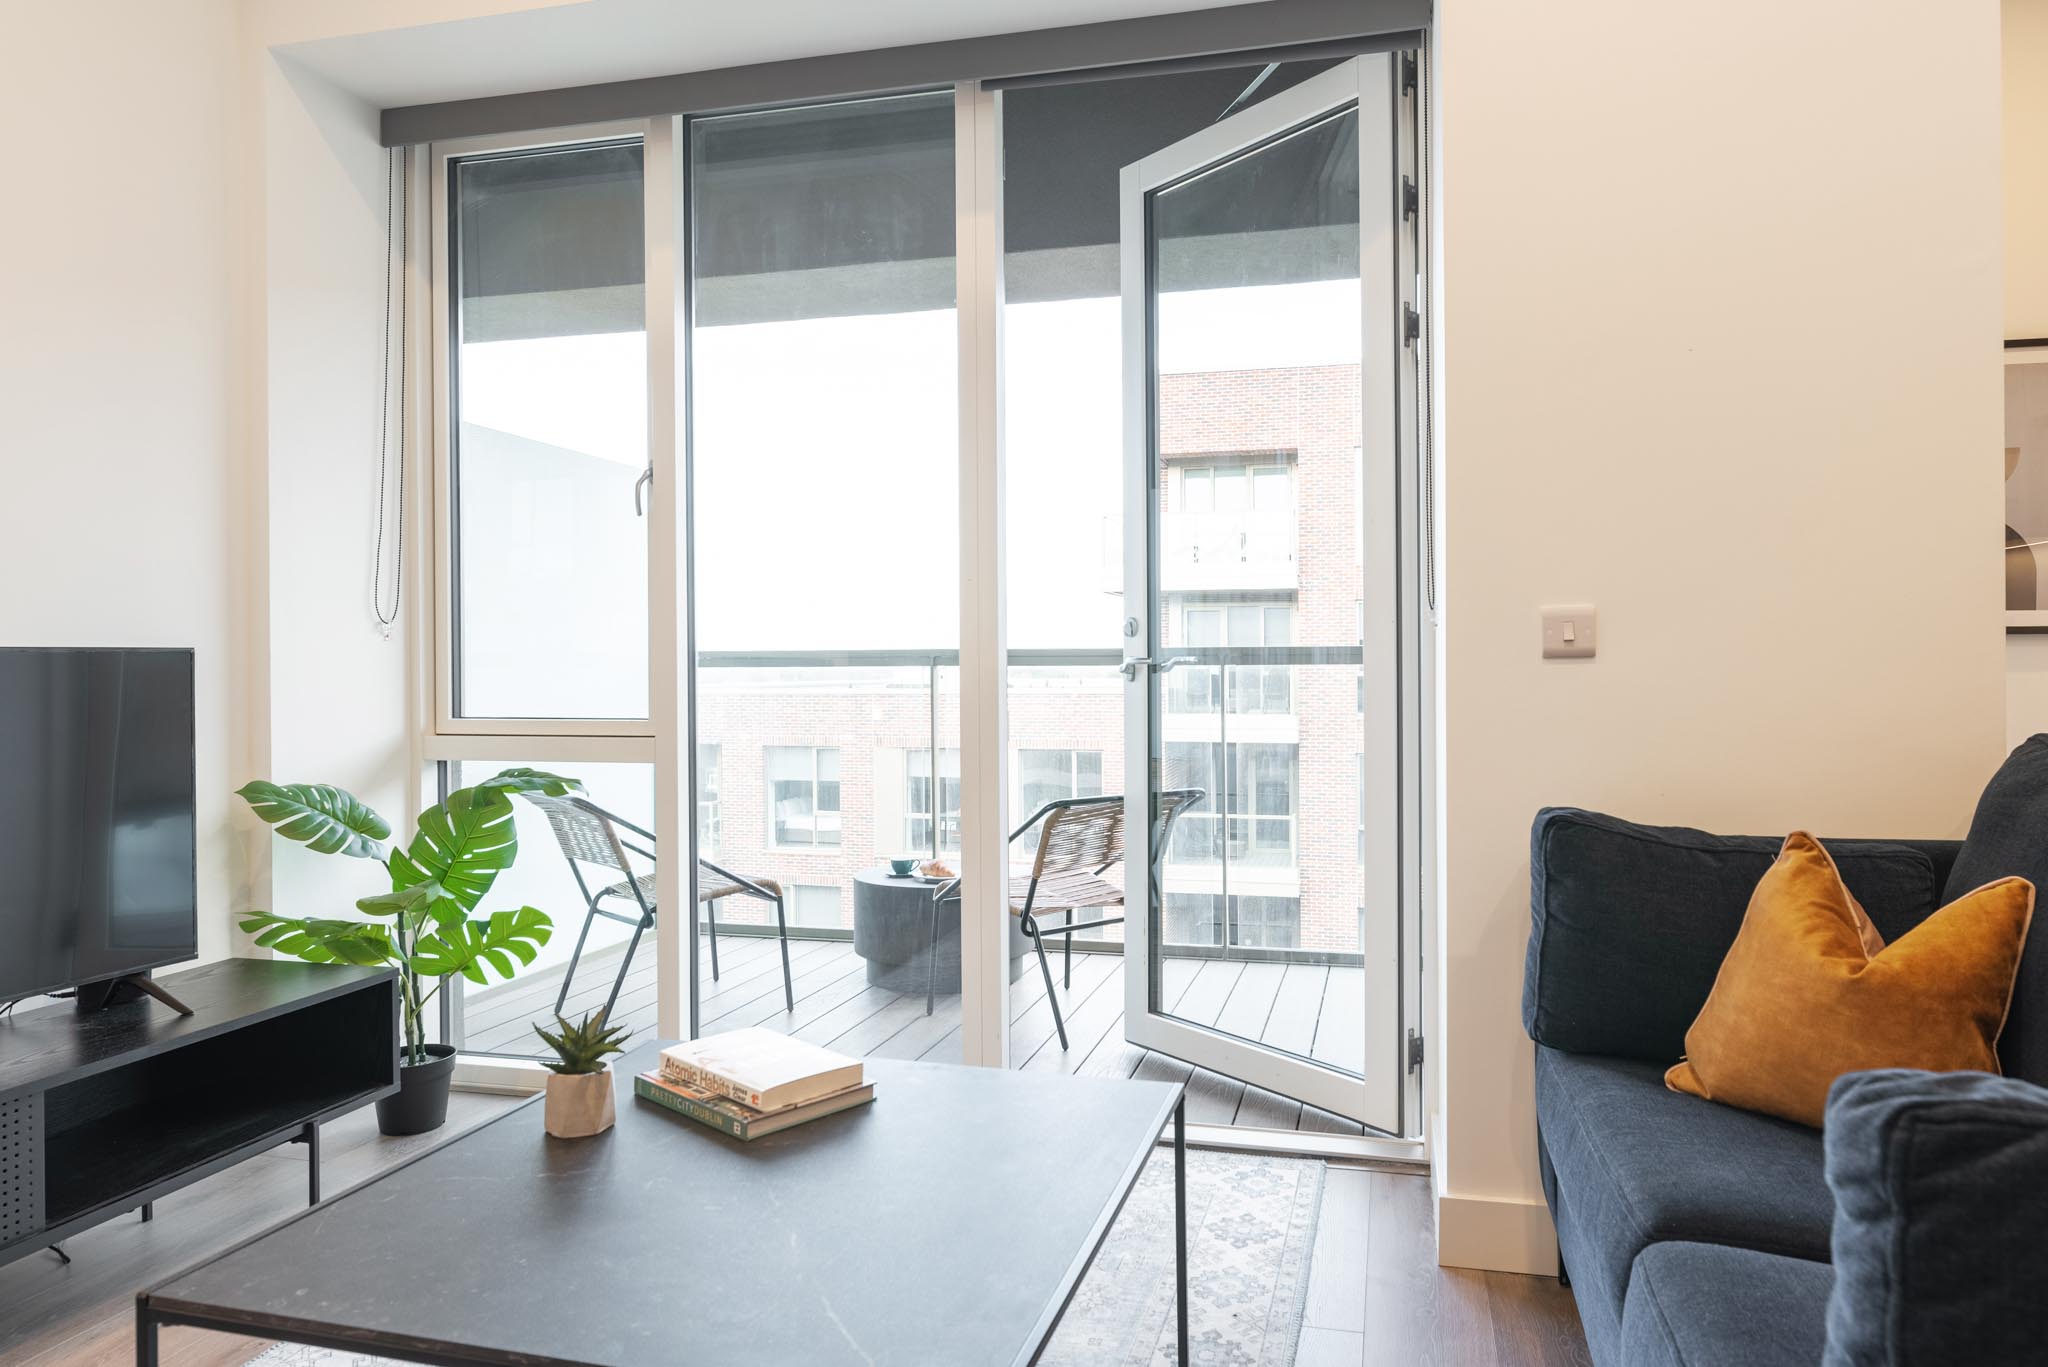 Living Room with balcony - Open Plan One Bedroom Apartment - Urban Rest - Griffith Wood Dublin